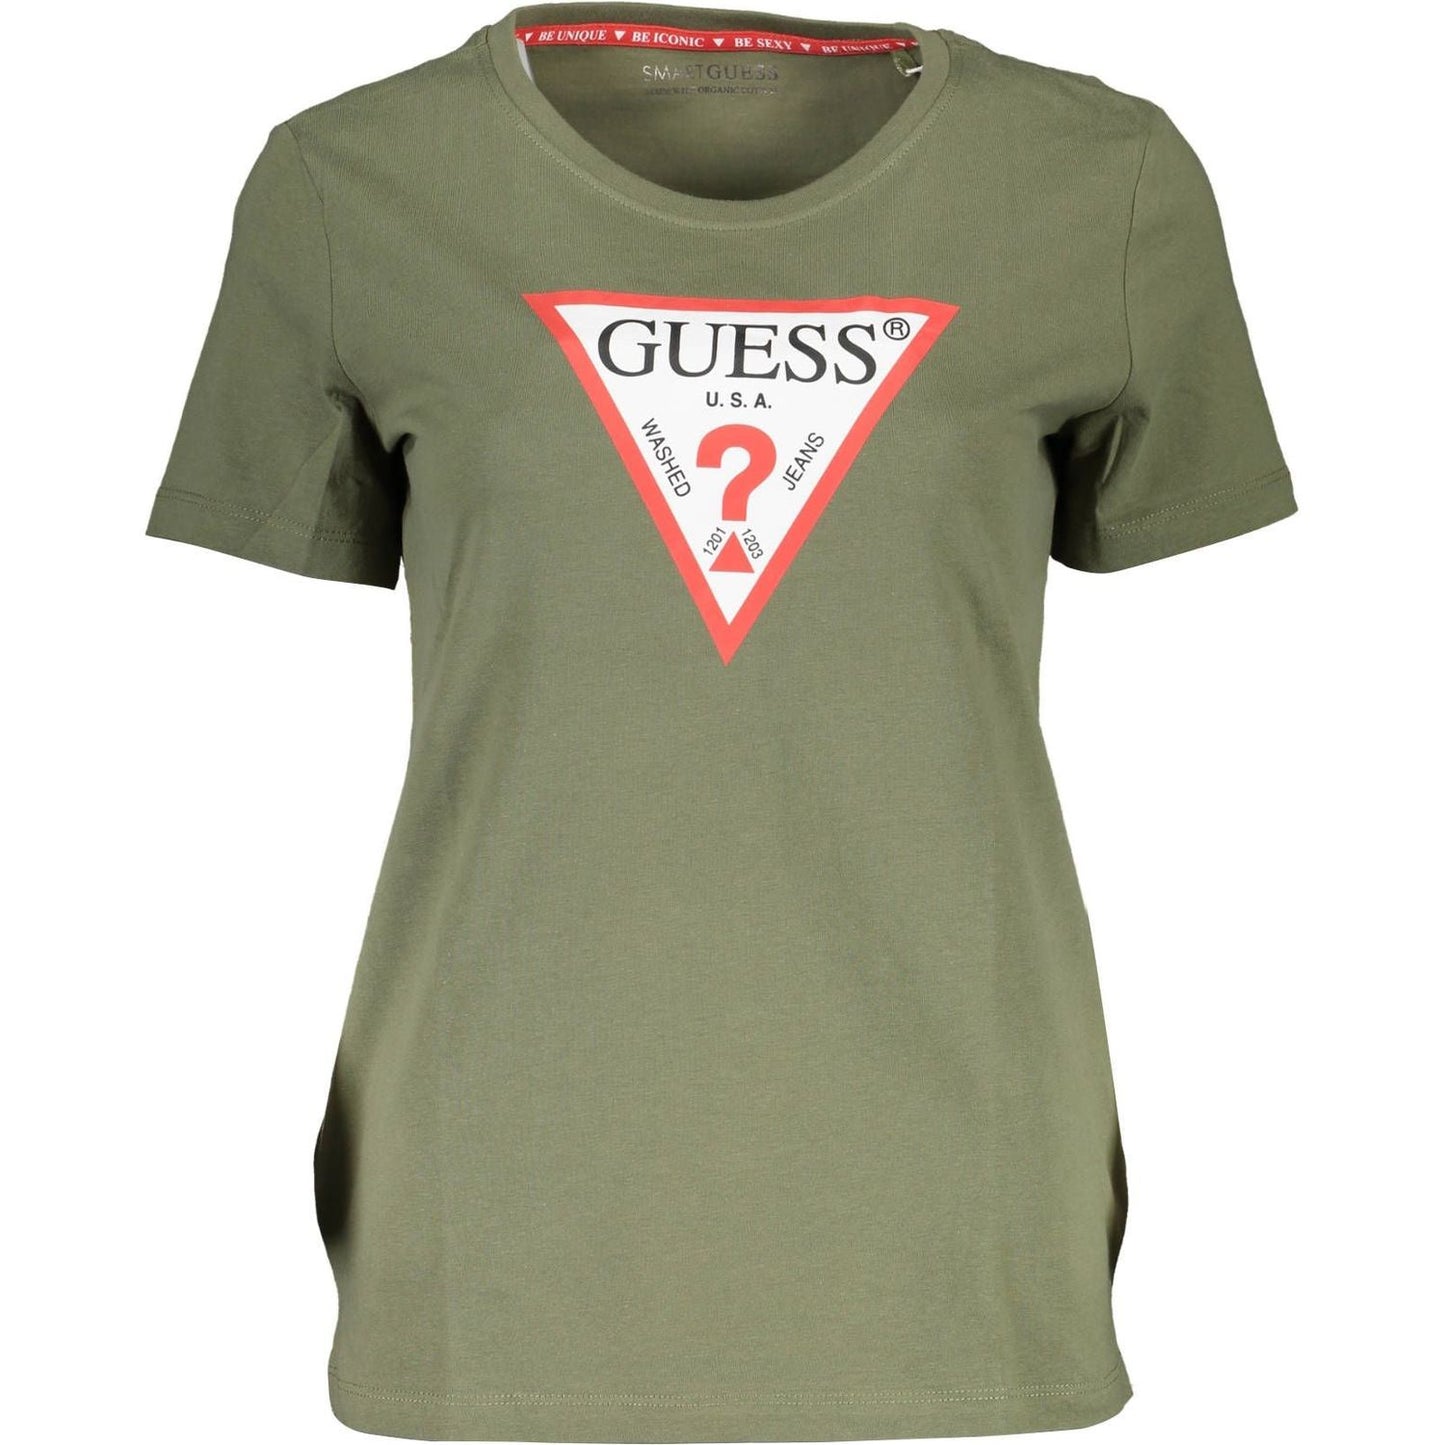 Guess Jeans Chic Green Crew Neck Logo Tee chic-green-crew-neck-logo-tee